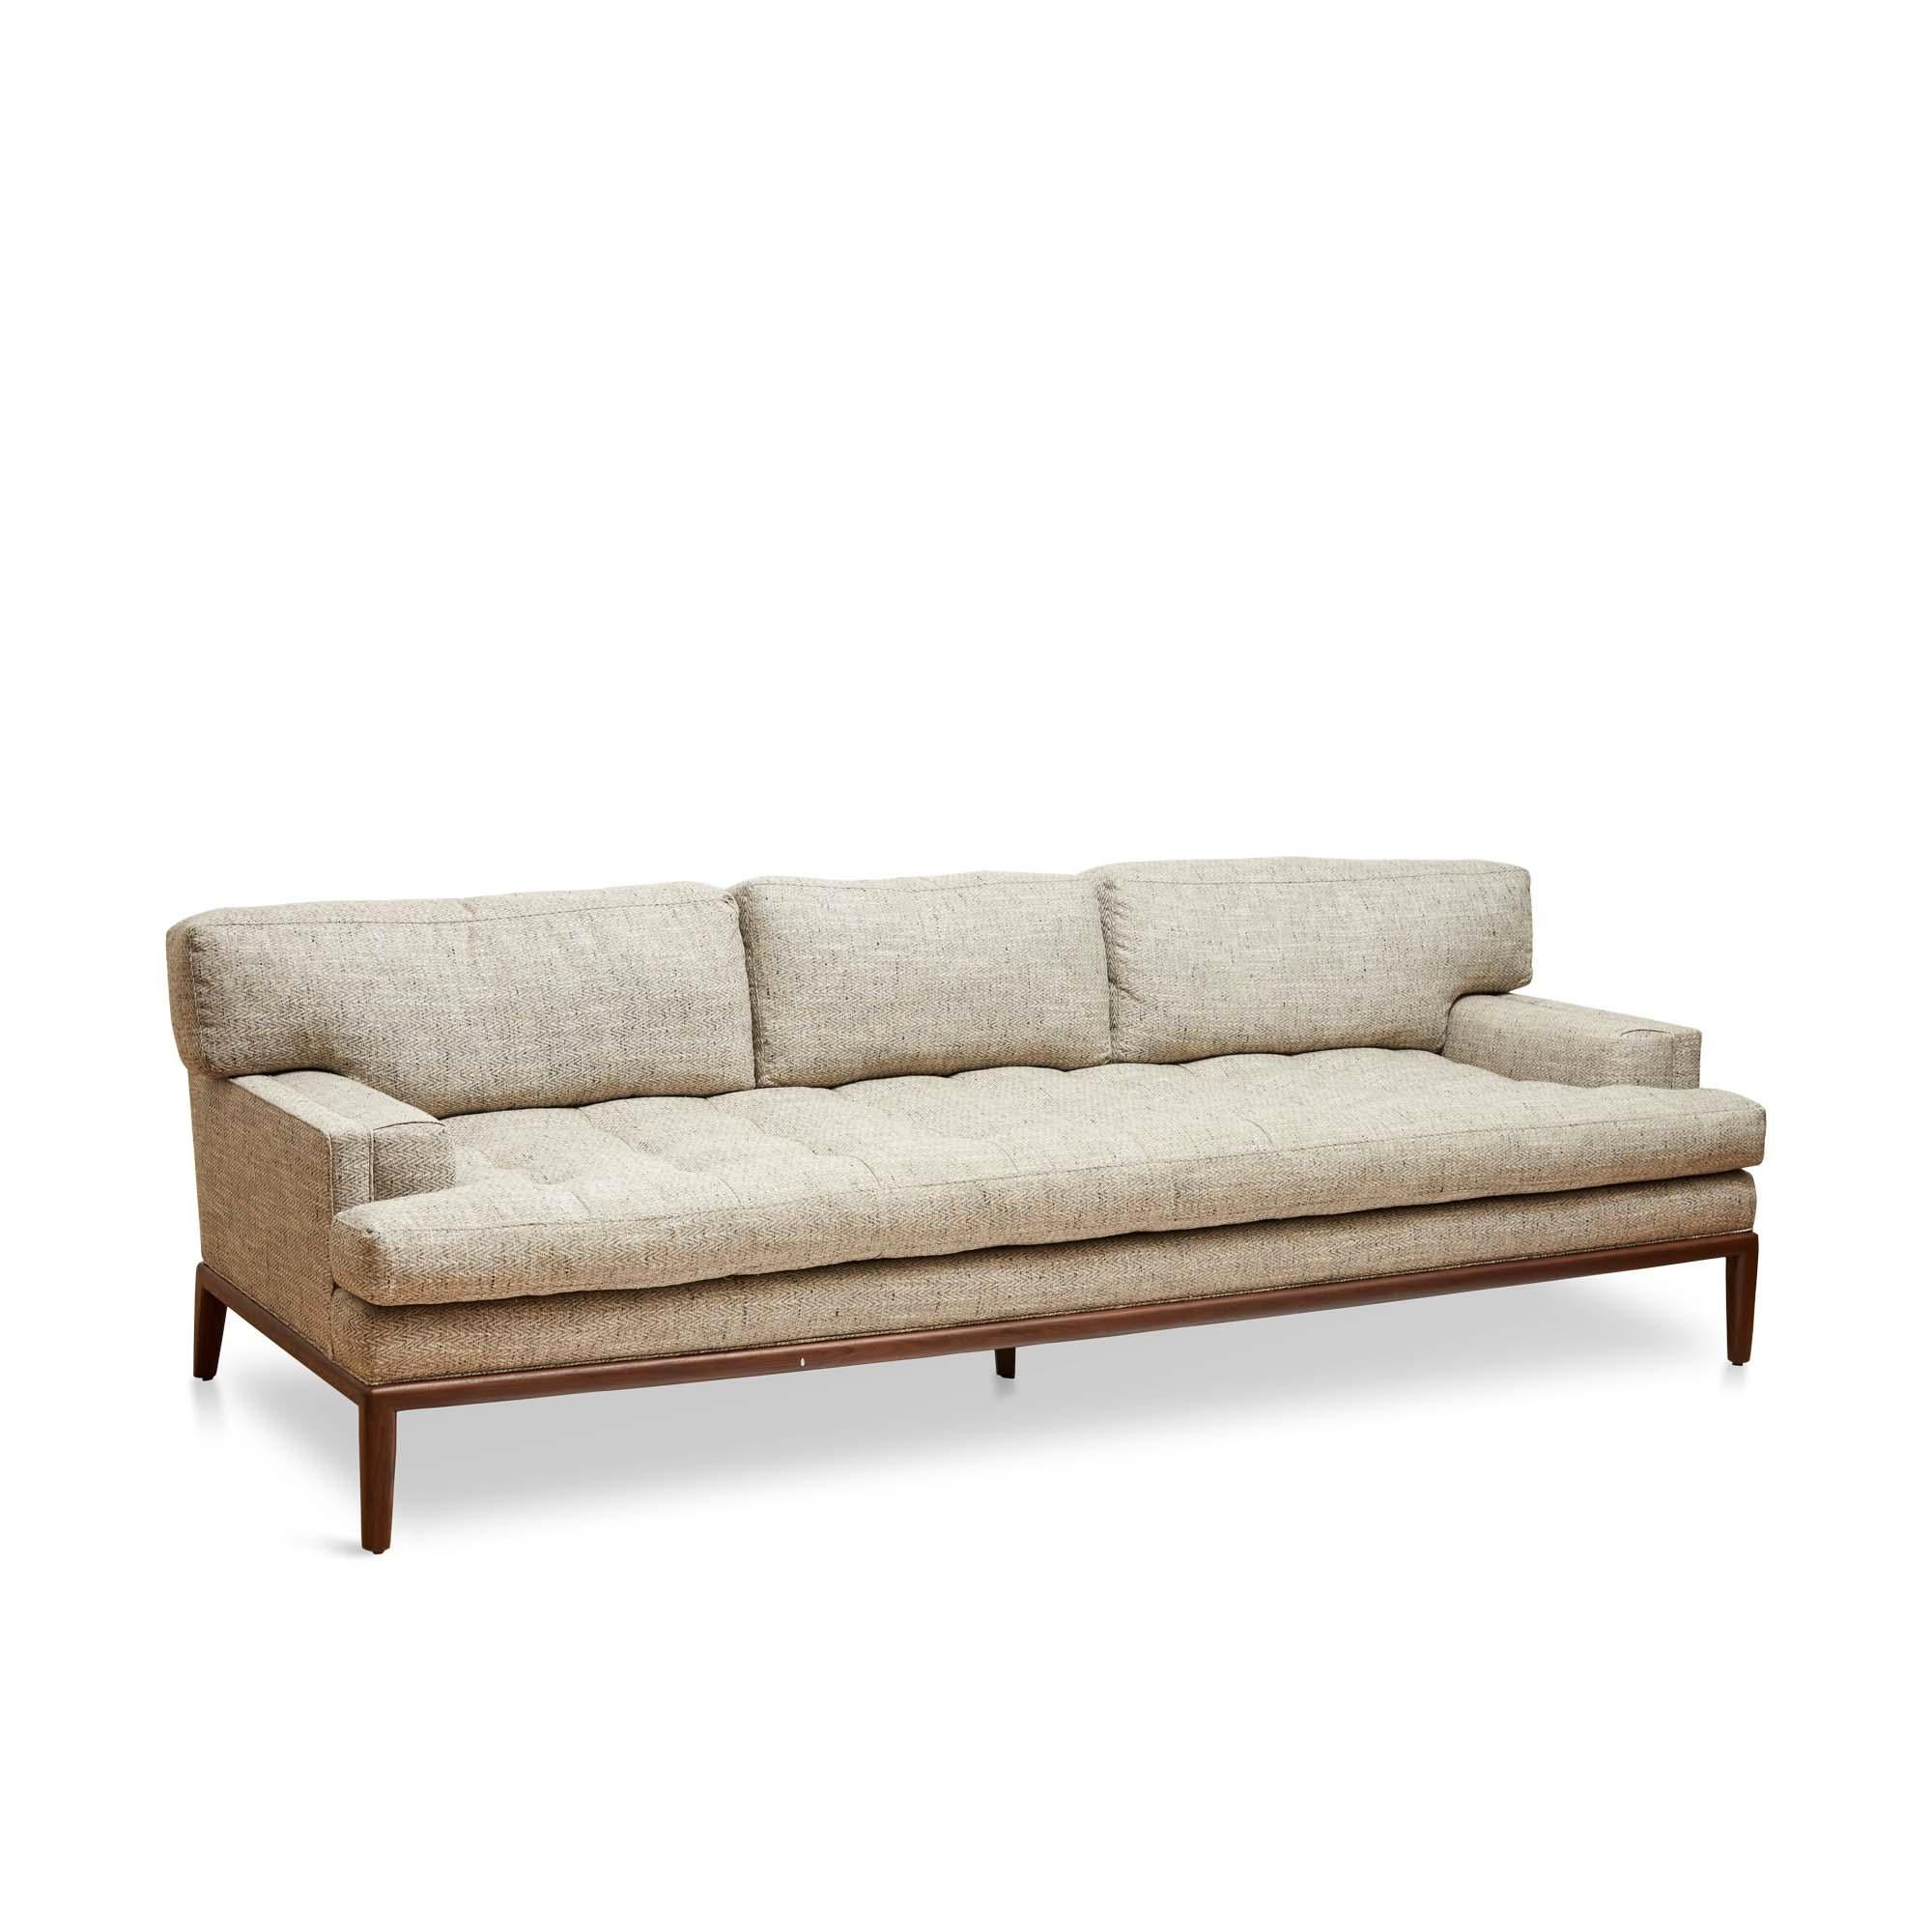 The Forster sofa is a midcentury inspired sofa with a loose tufted seat, loose back cushions, and piped details. The sofa rests atop a simple, rounded wood base.

The Lawson-Fenning Collection is designed and handmade in Los Angeles,